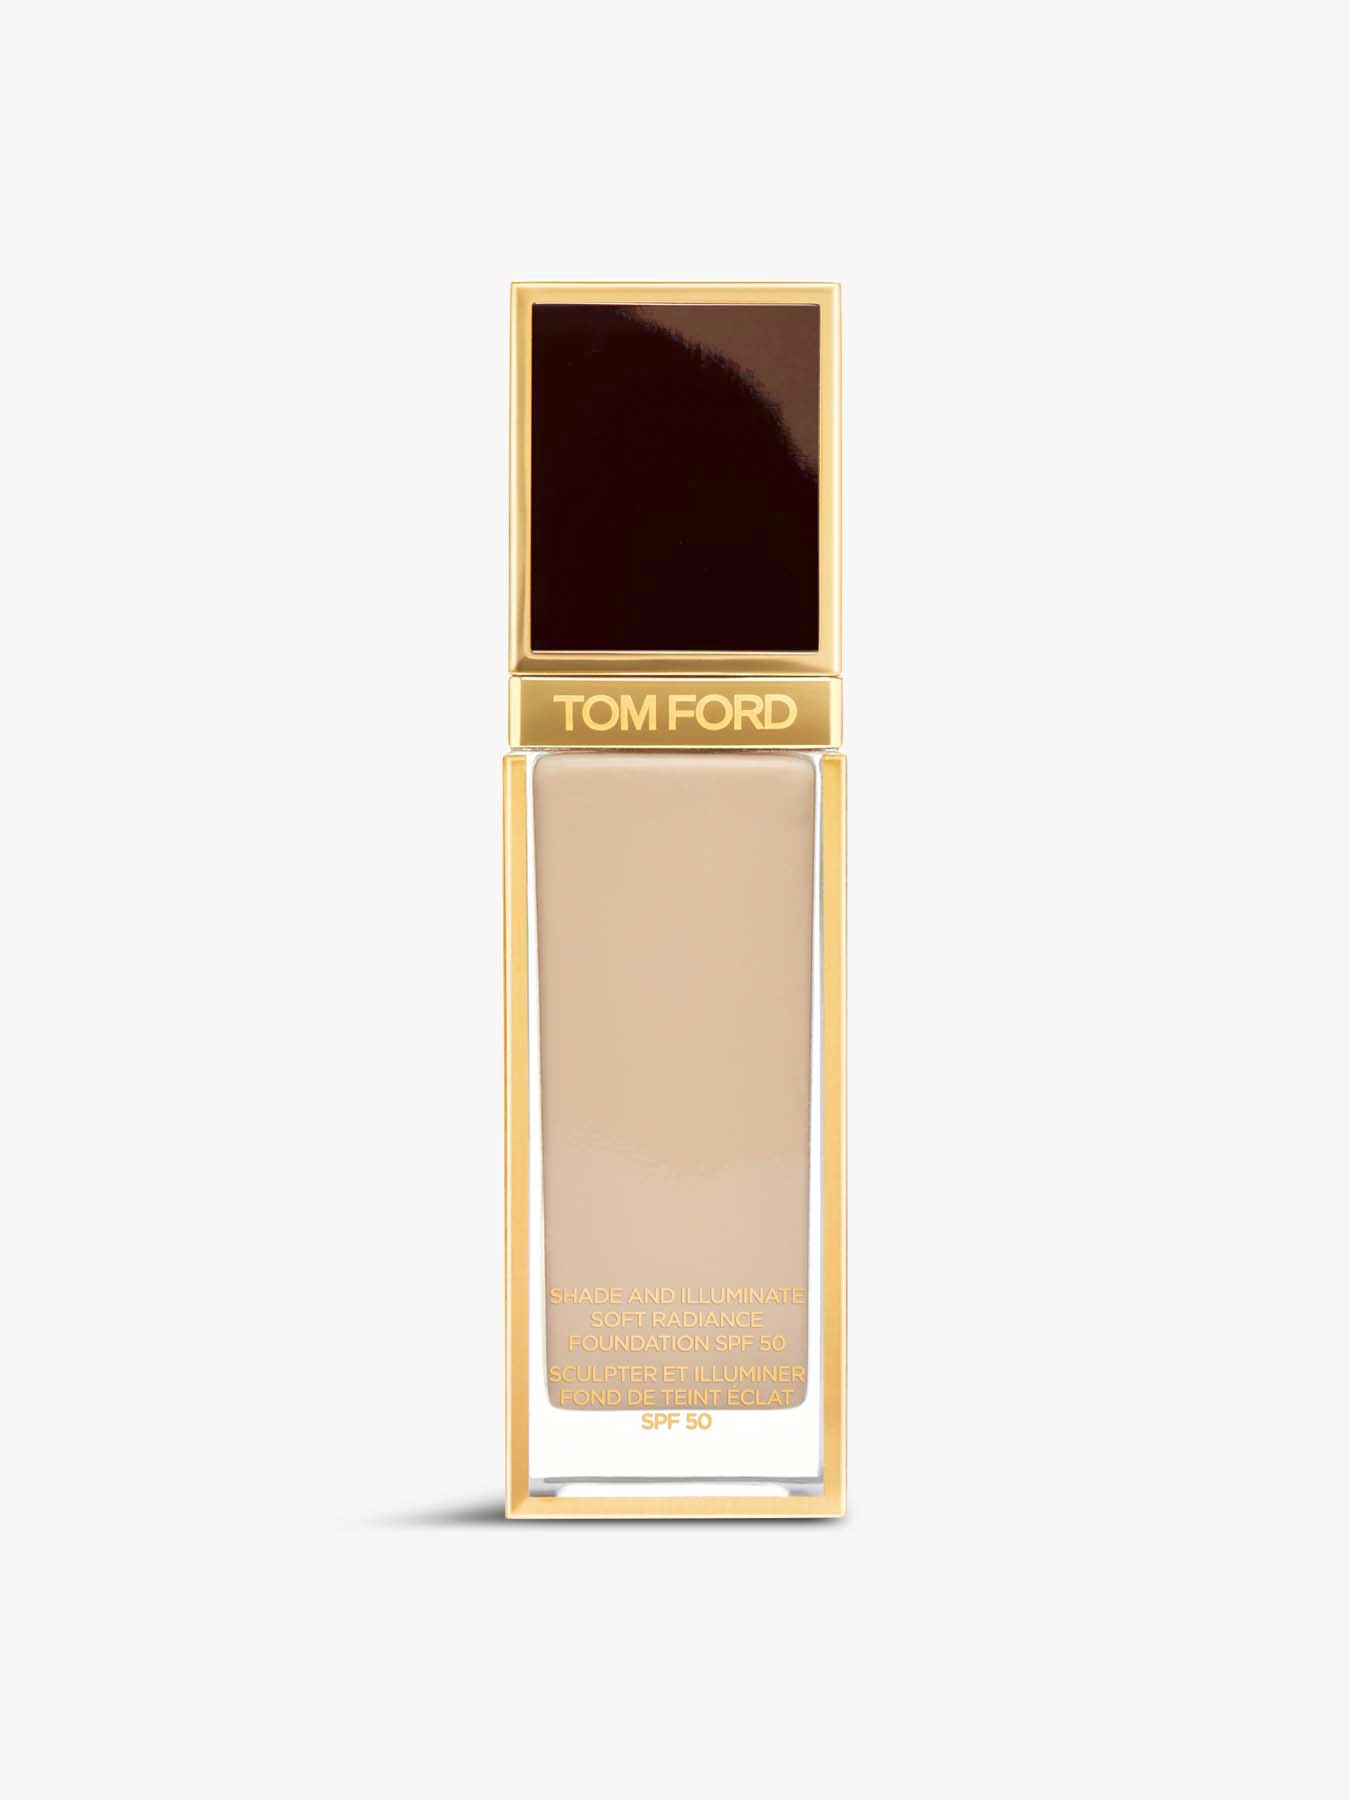 Tom Ford Shade And Illuminate Soft Radiance Foundation Spf 50 4.0 Fawn